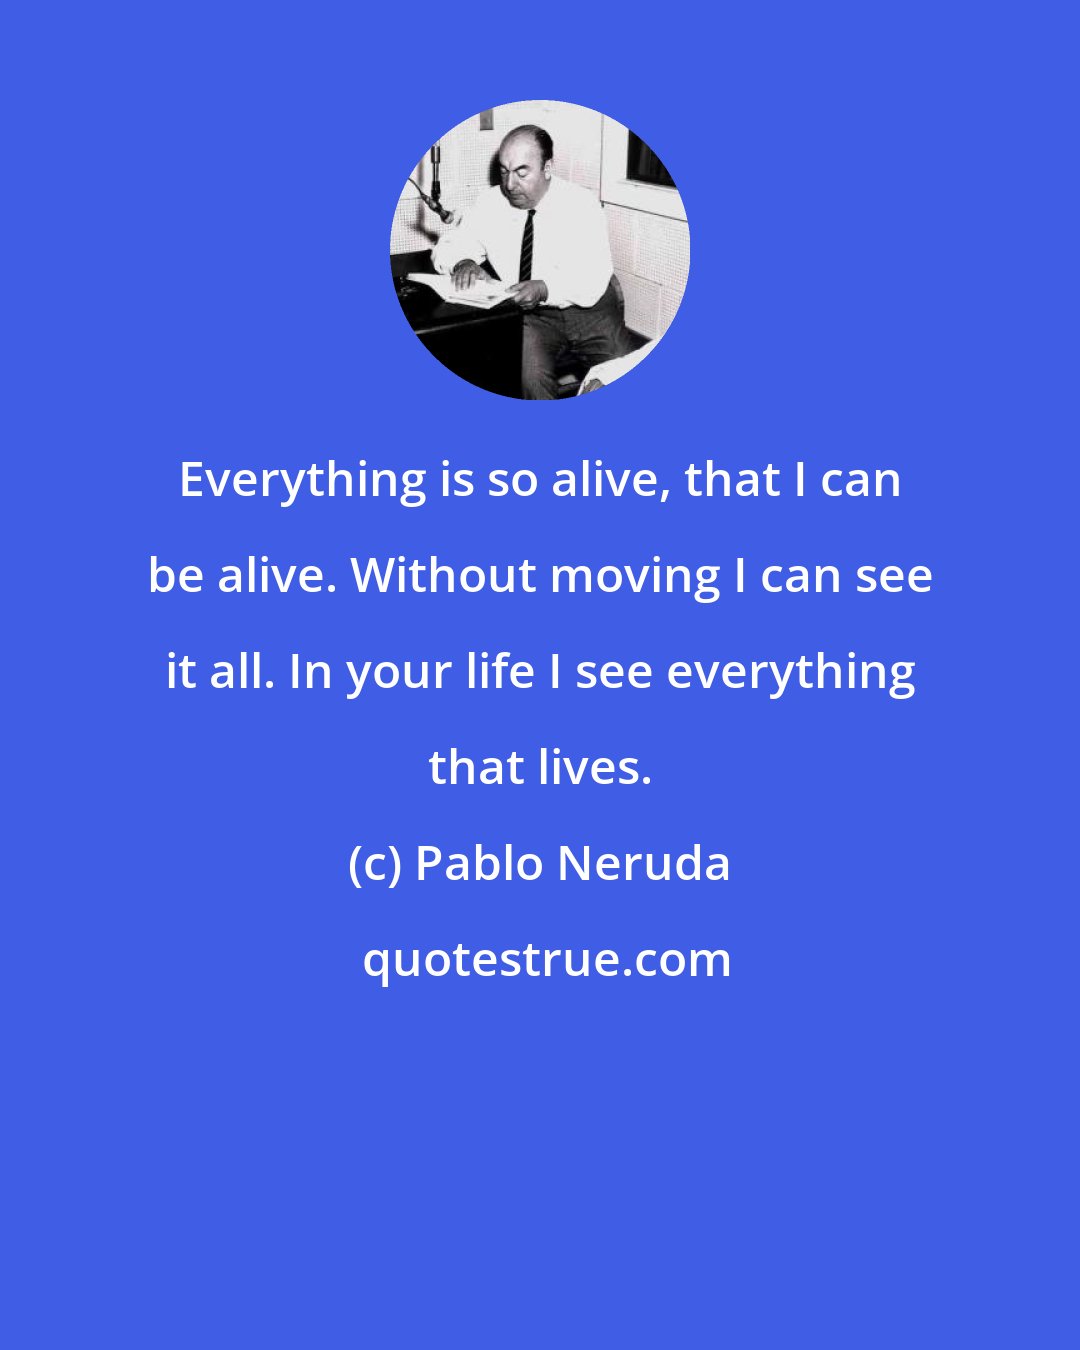 Pablo Neruda: Everything is so alive, that I can be alive. Without moving I can see it all. In your life I see everything that lives.